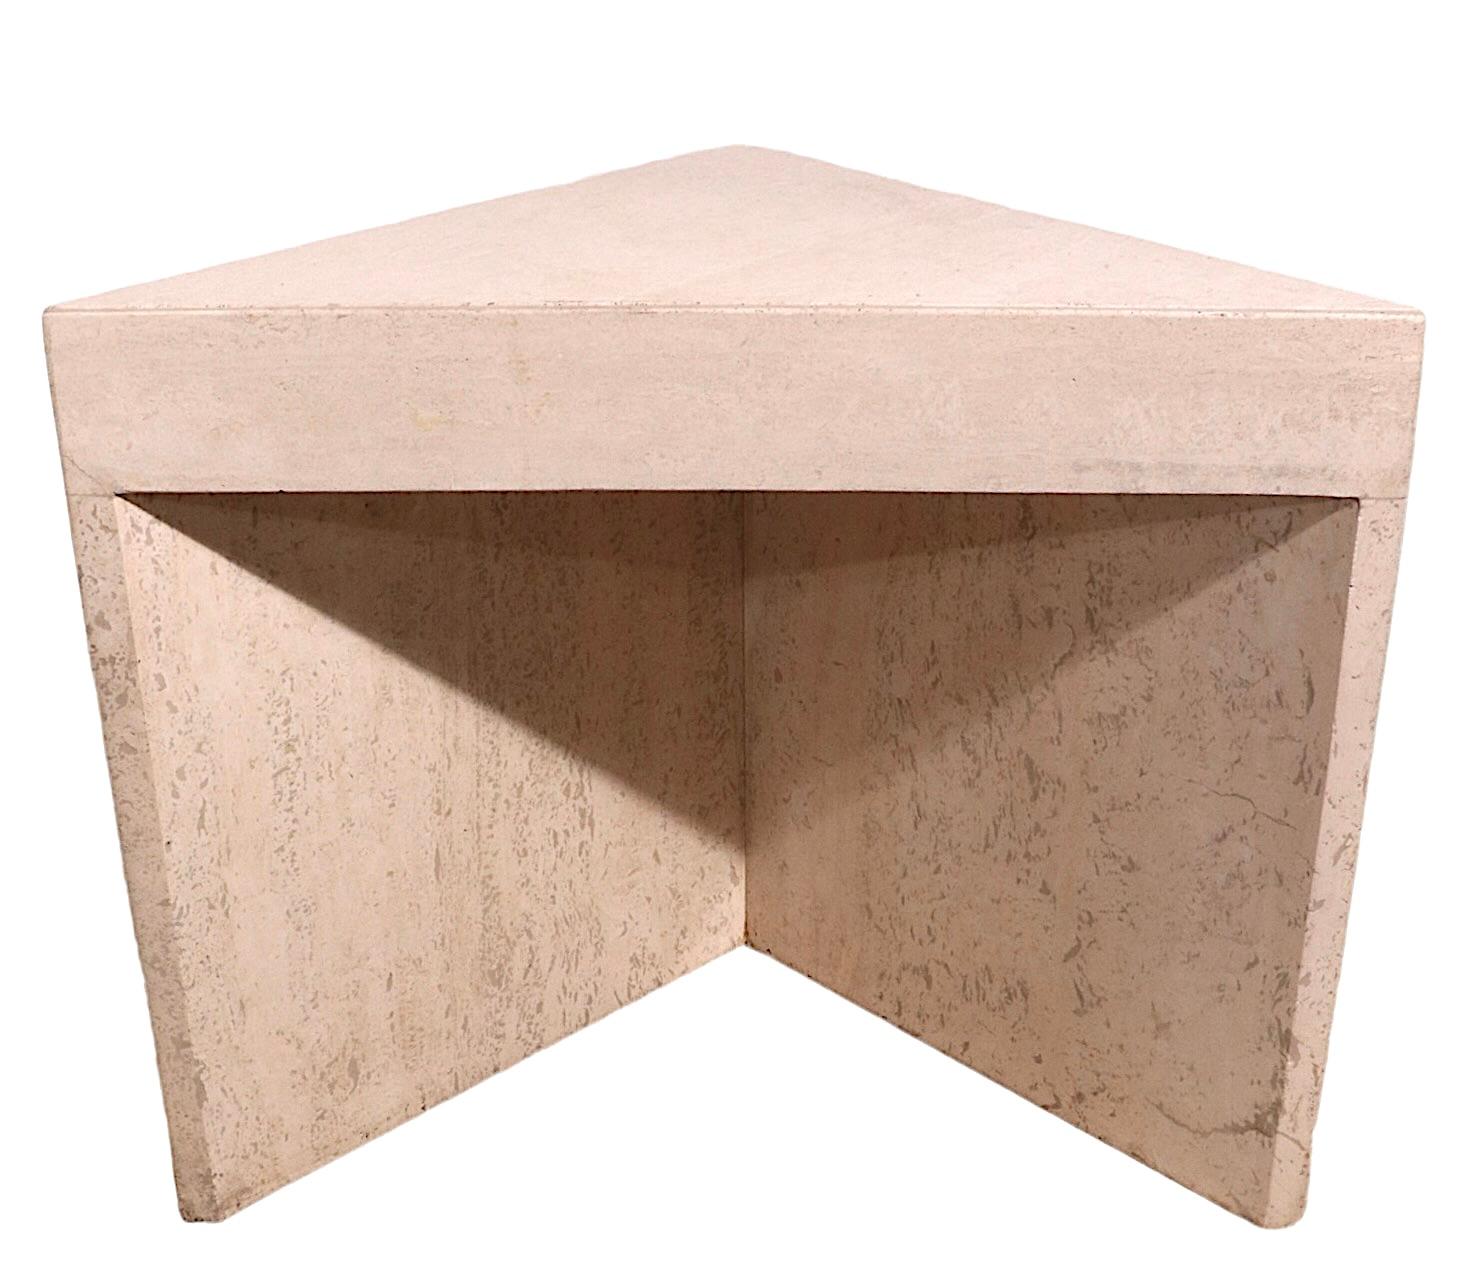 Italian Travertine Marble Side End Table att. to Up & Up Made in Italy c. 1970’s For Sale 11